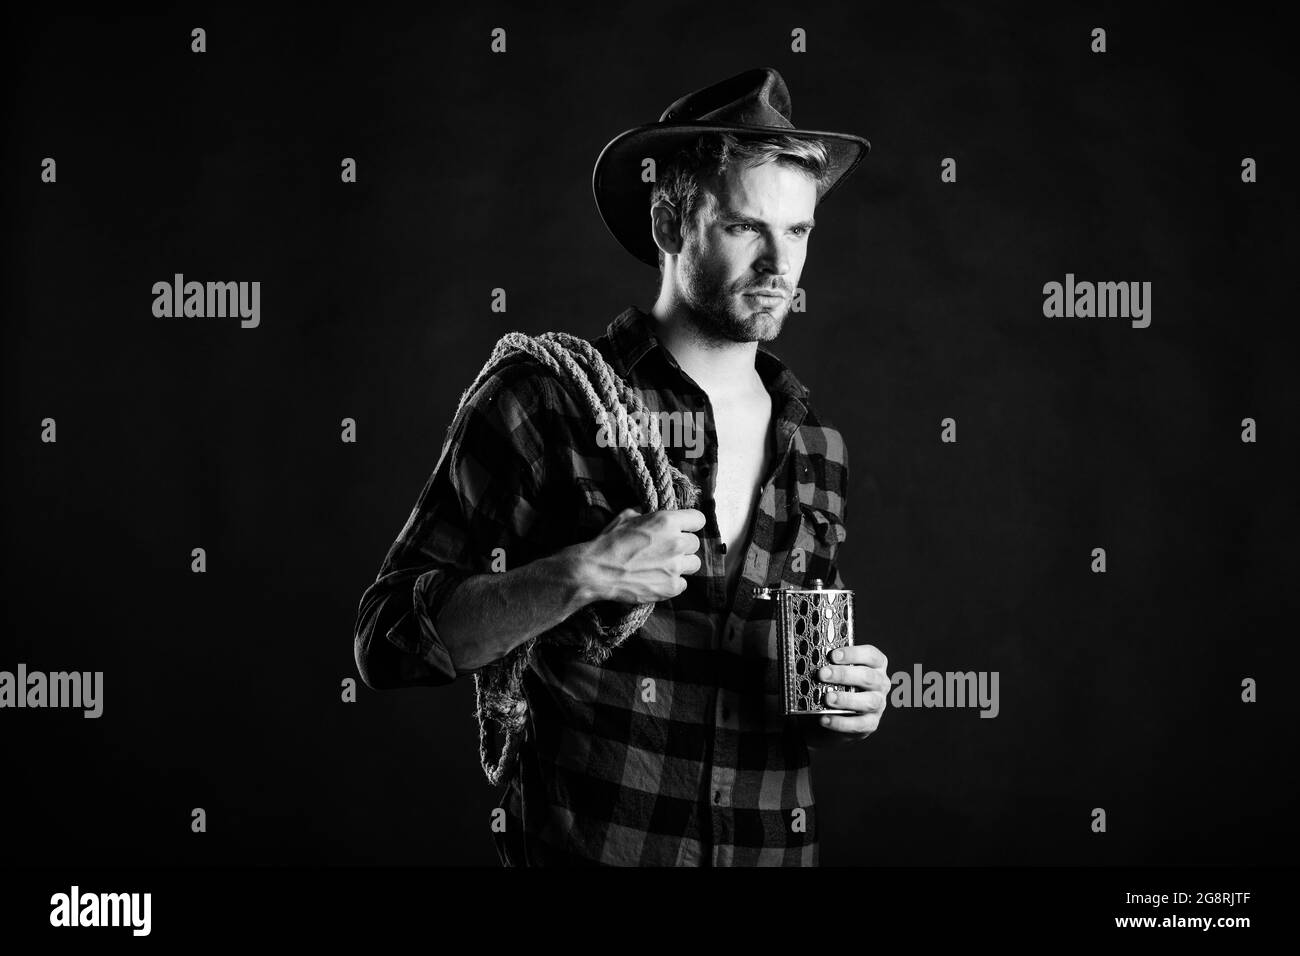 Sheriff concept. Brutal cowboy drinking alcohol. Western culture. Man wearing hat hold rope and flask. Lasso tool of American cowboy. Man handsome Stock Photo